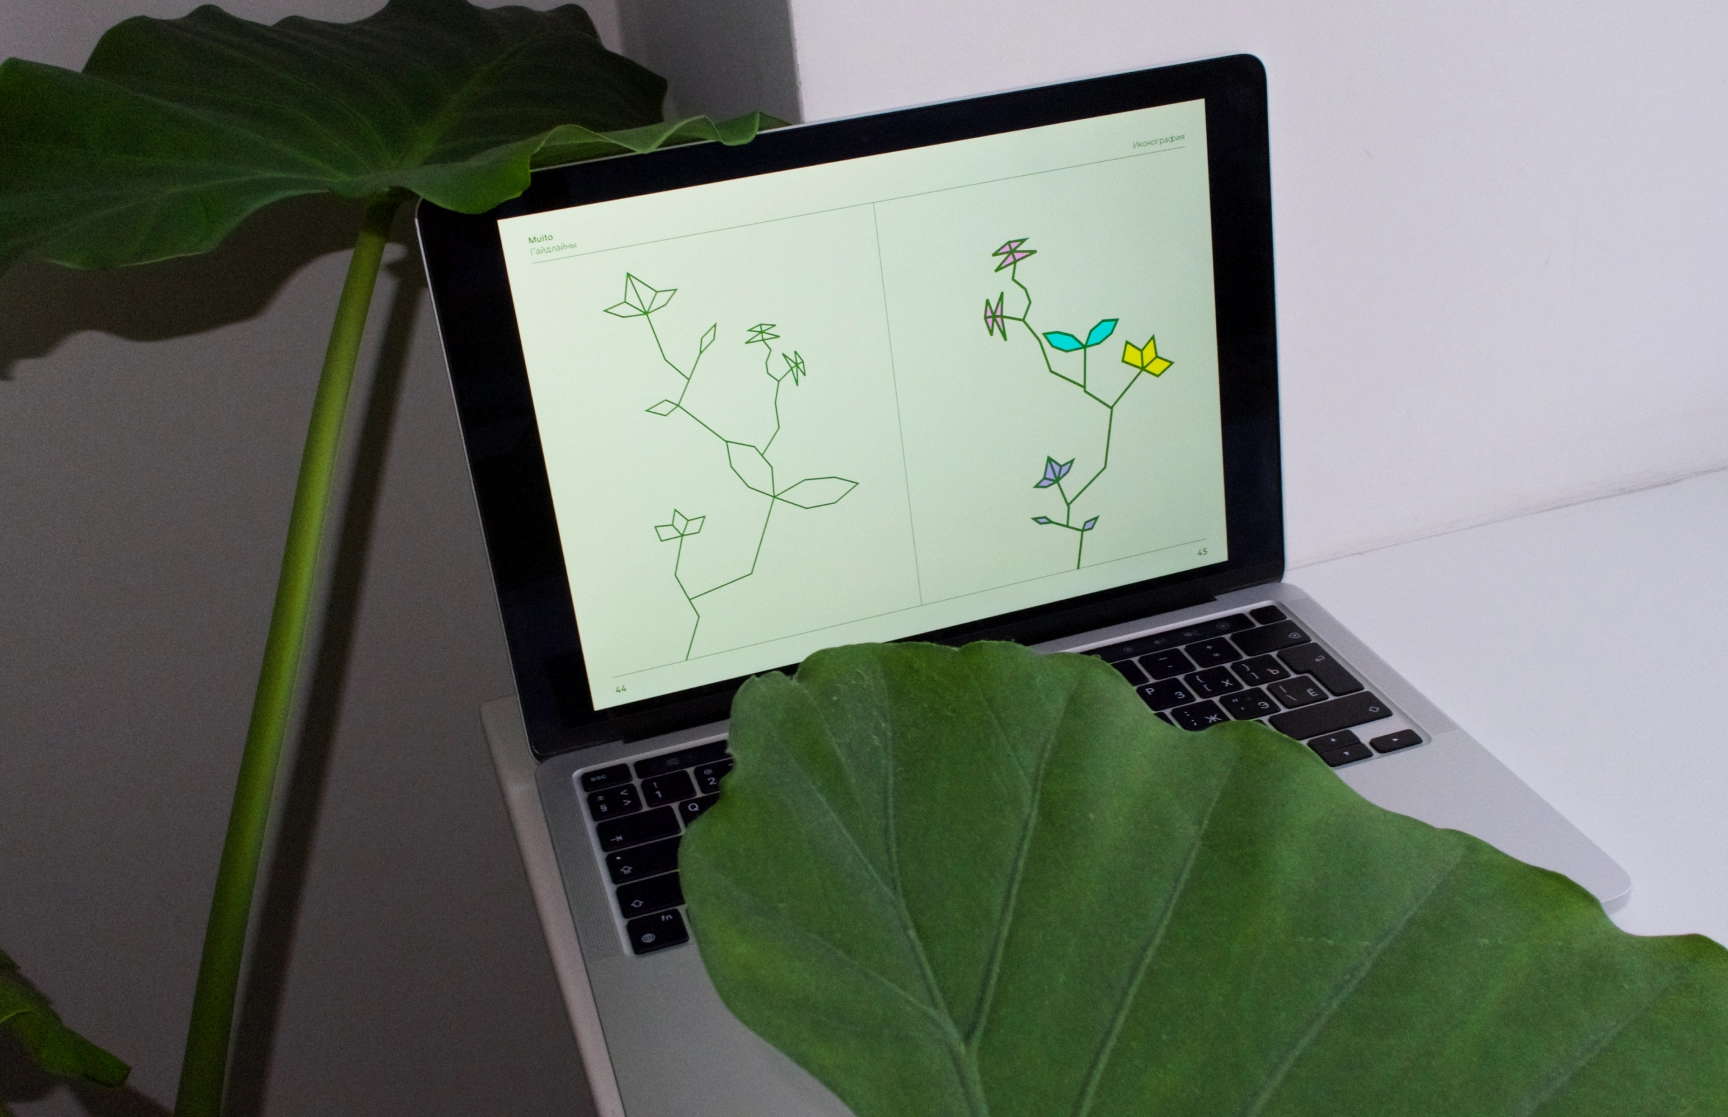 Minimalist brand design for a flower company on a laptop screen